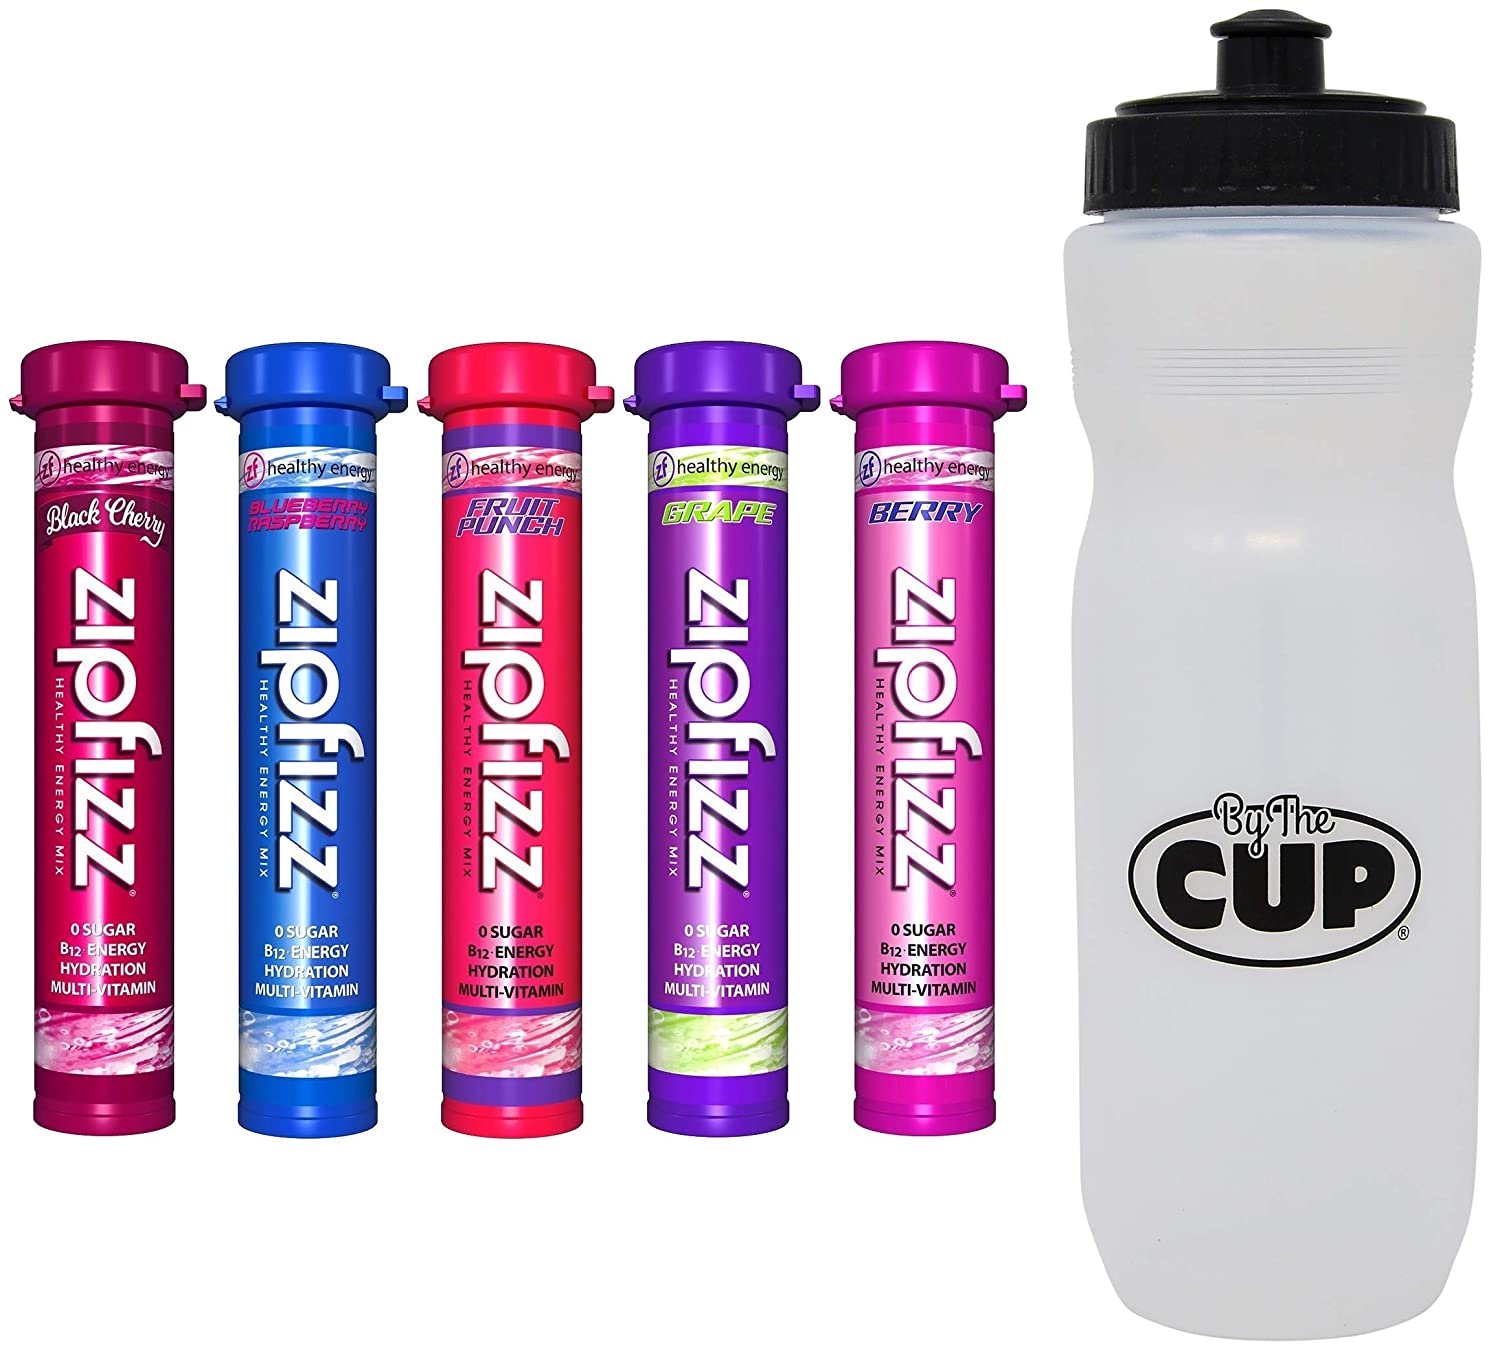 Zipfizz Energy Drink Mix Fruit Bowl Variety, 5 Caffeinated Flavors with By The Cup Sports Bottle